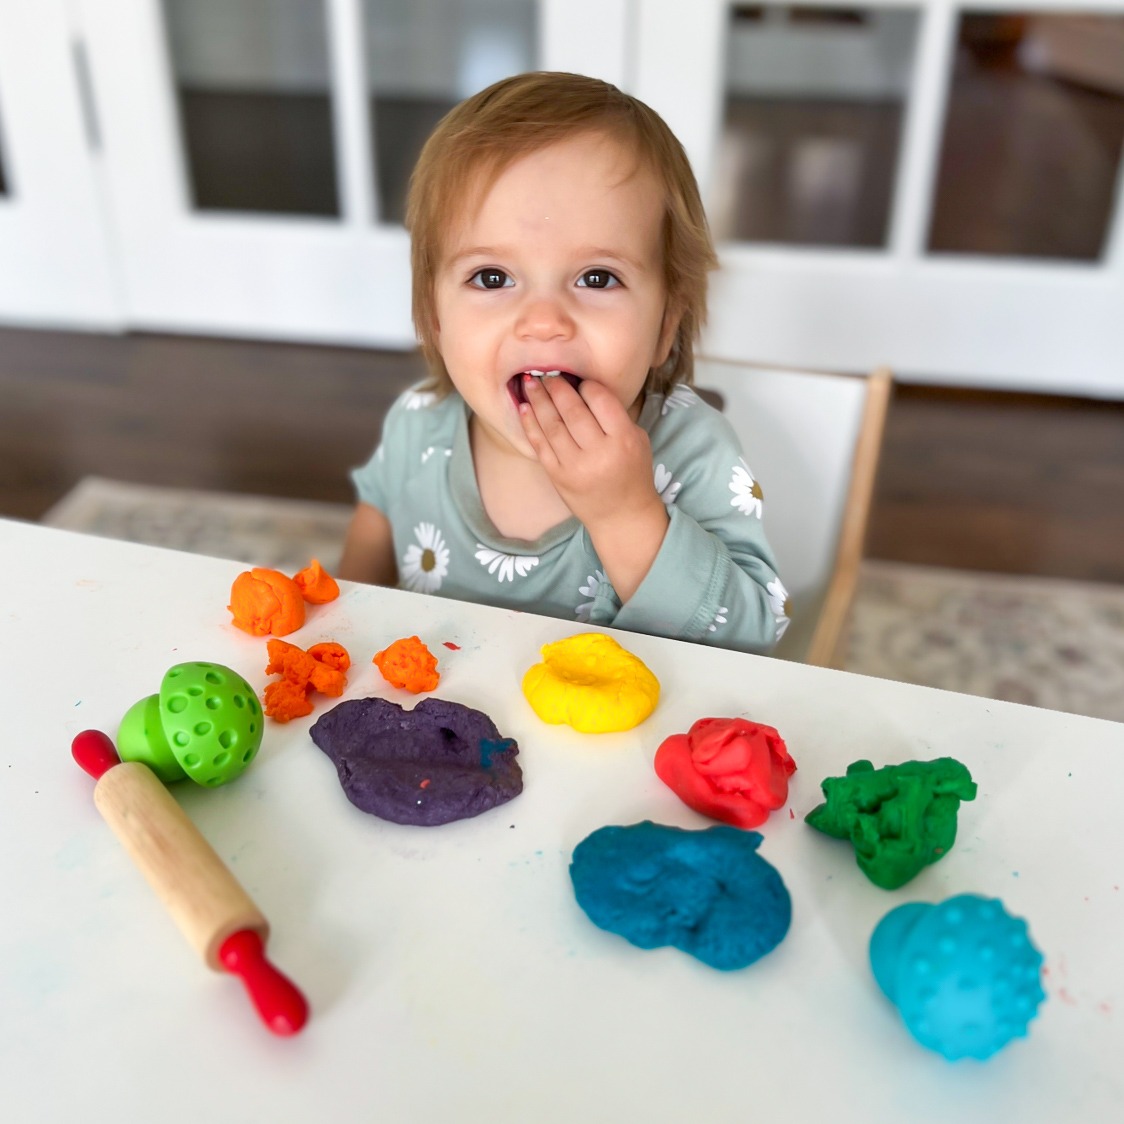 How to Make Edible Play Dough with 12 Easy Recipes!